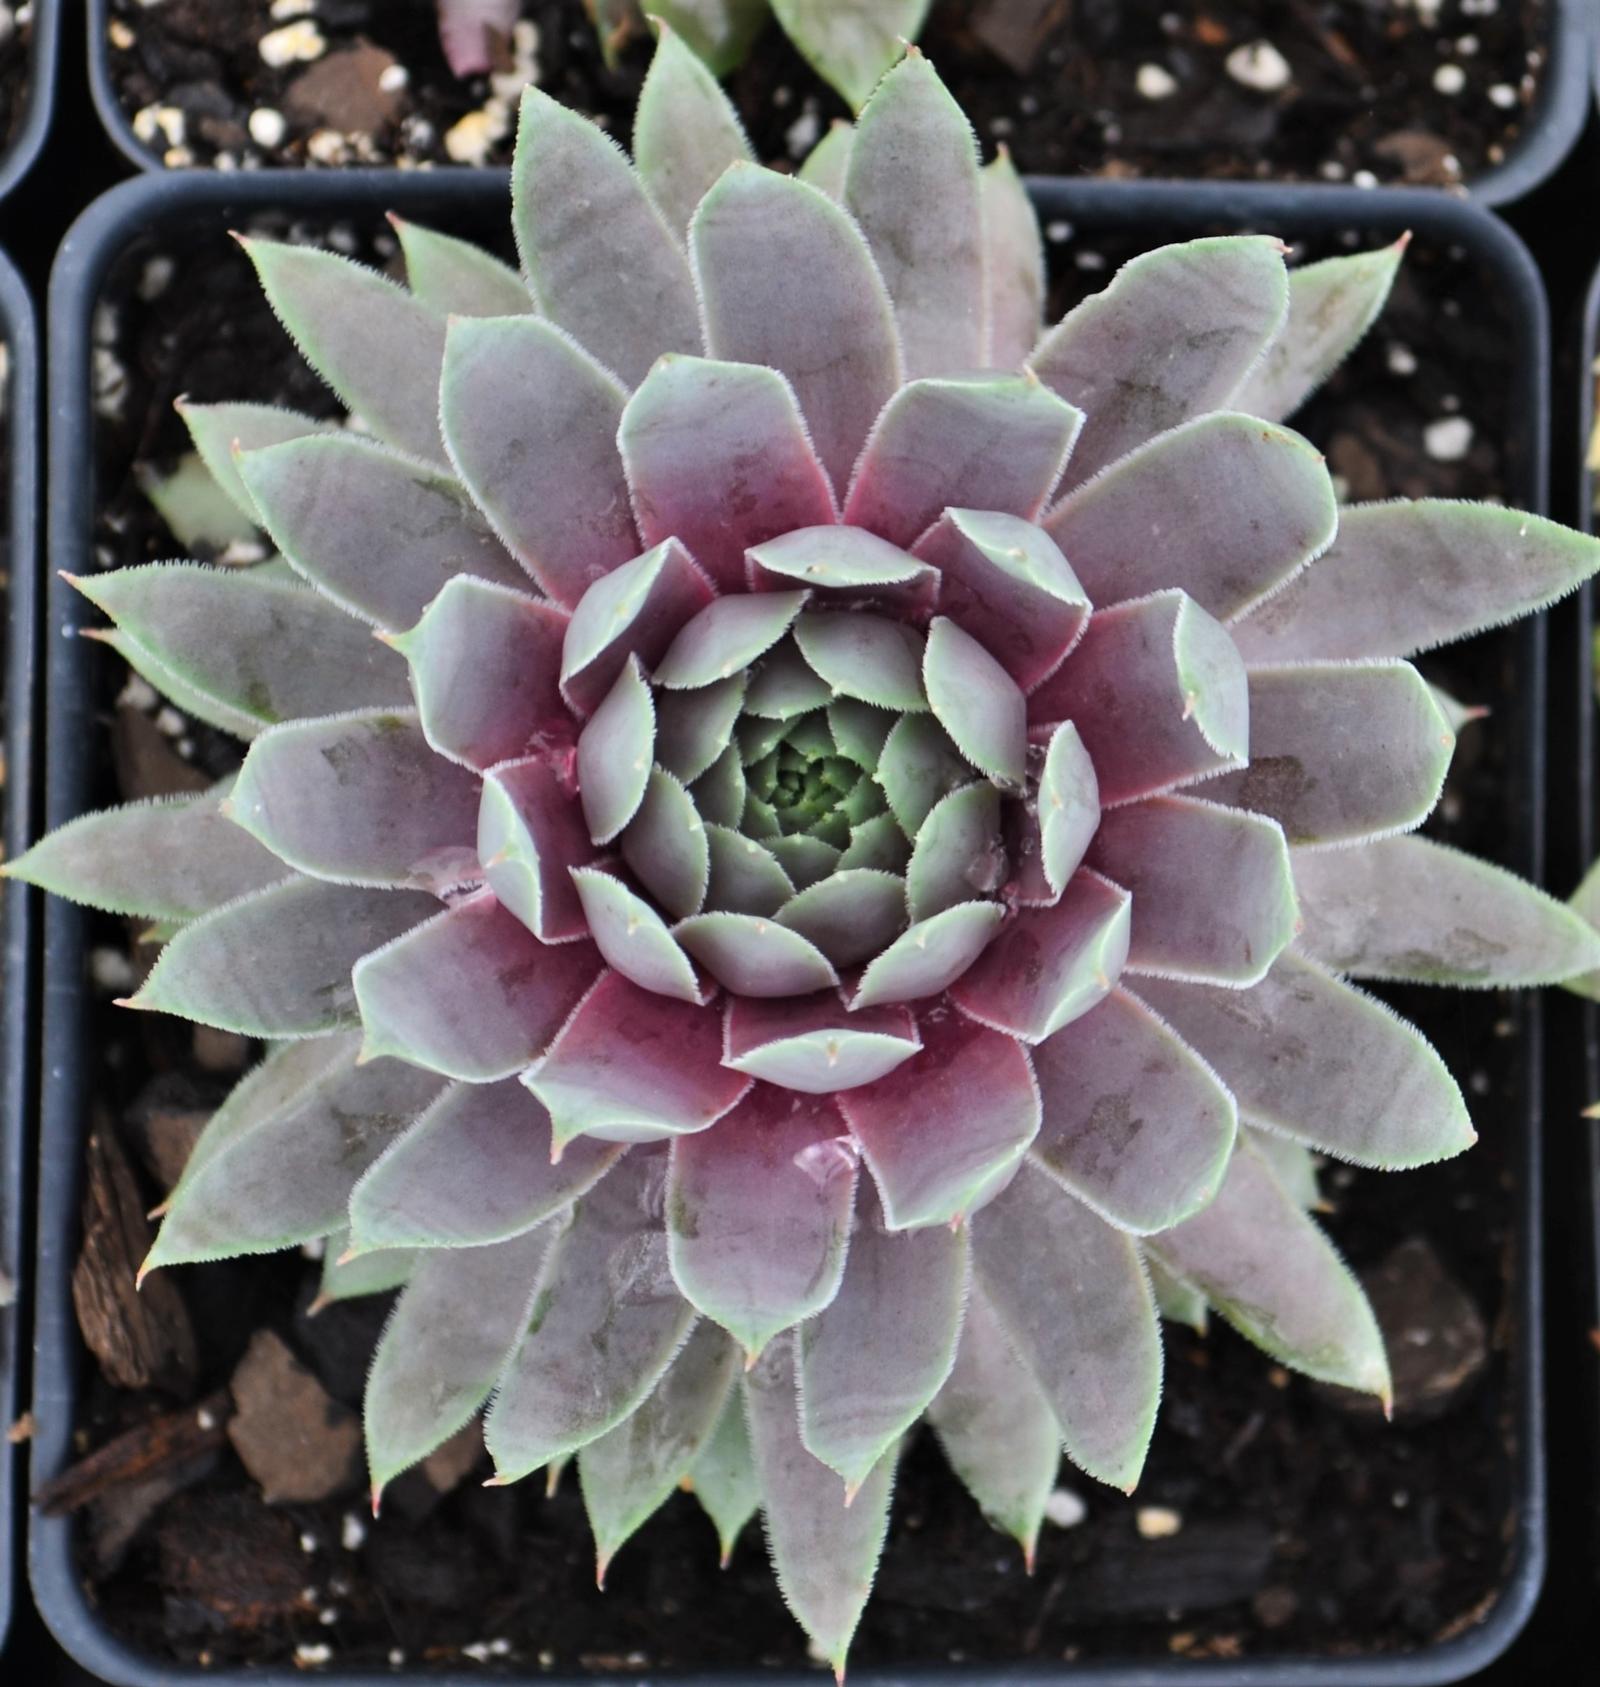 Sempervivum 'Pacific Blue Ice' - Hens and Chicks from Hillcrest Nursery